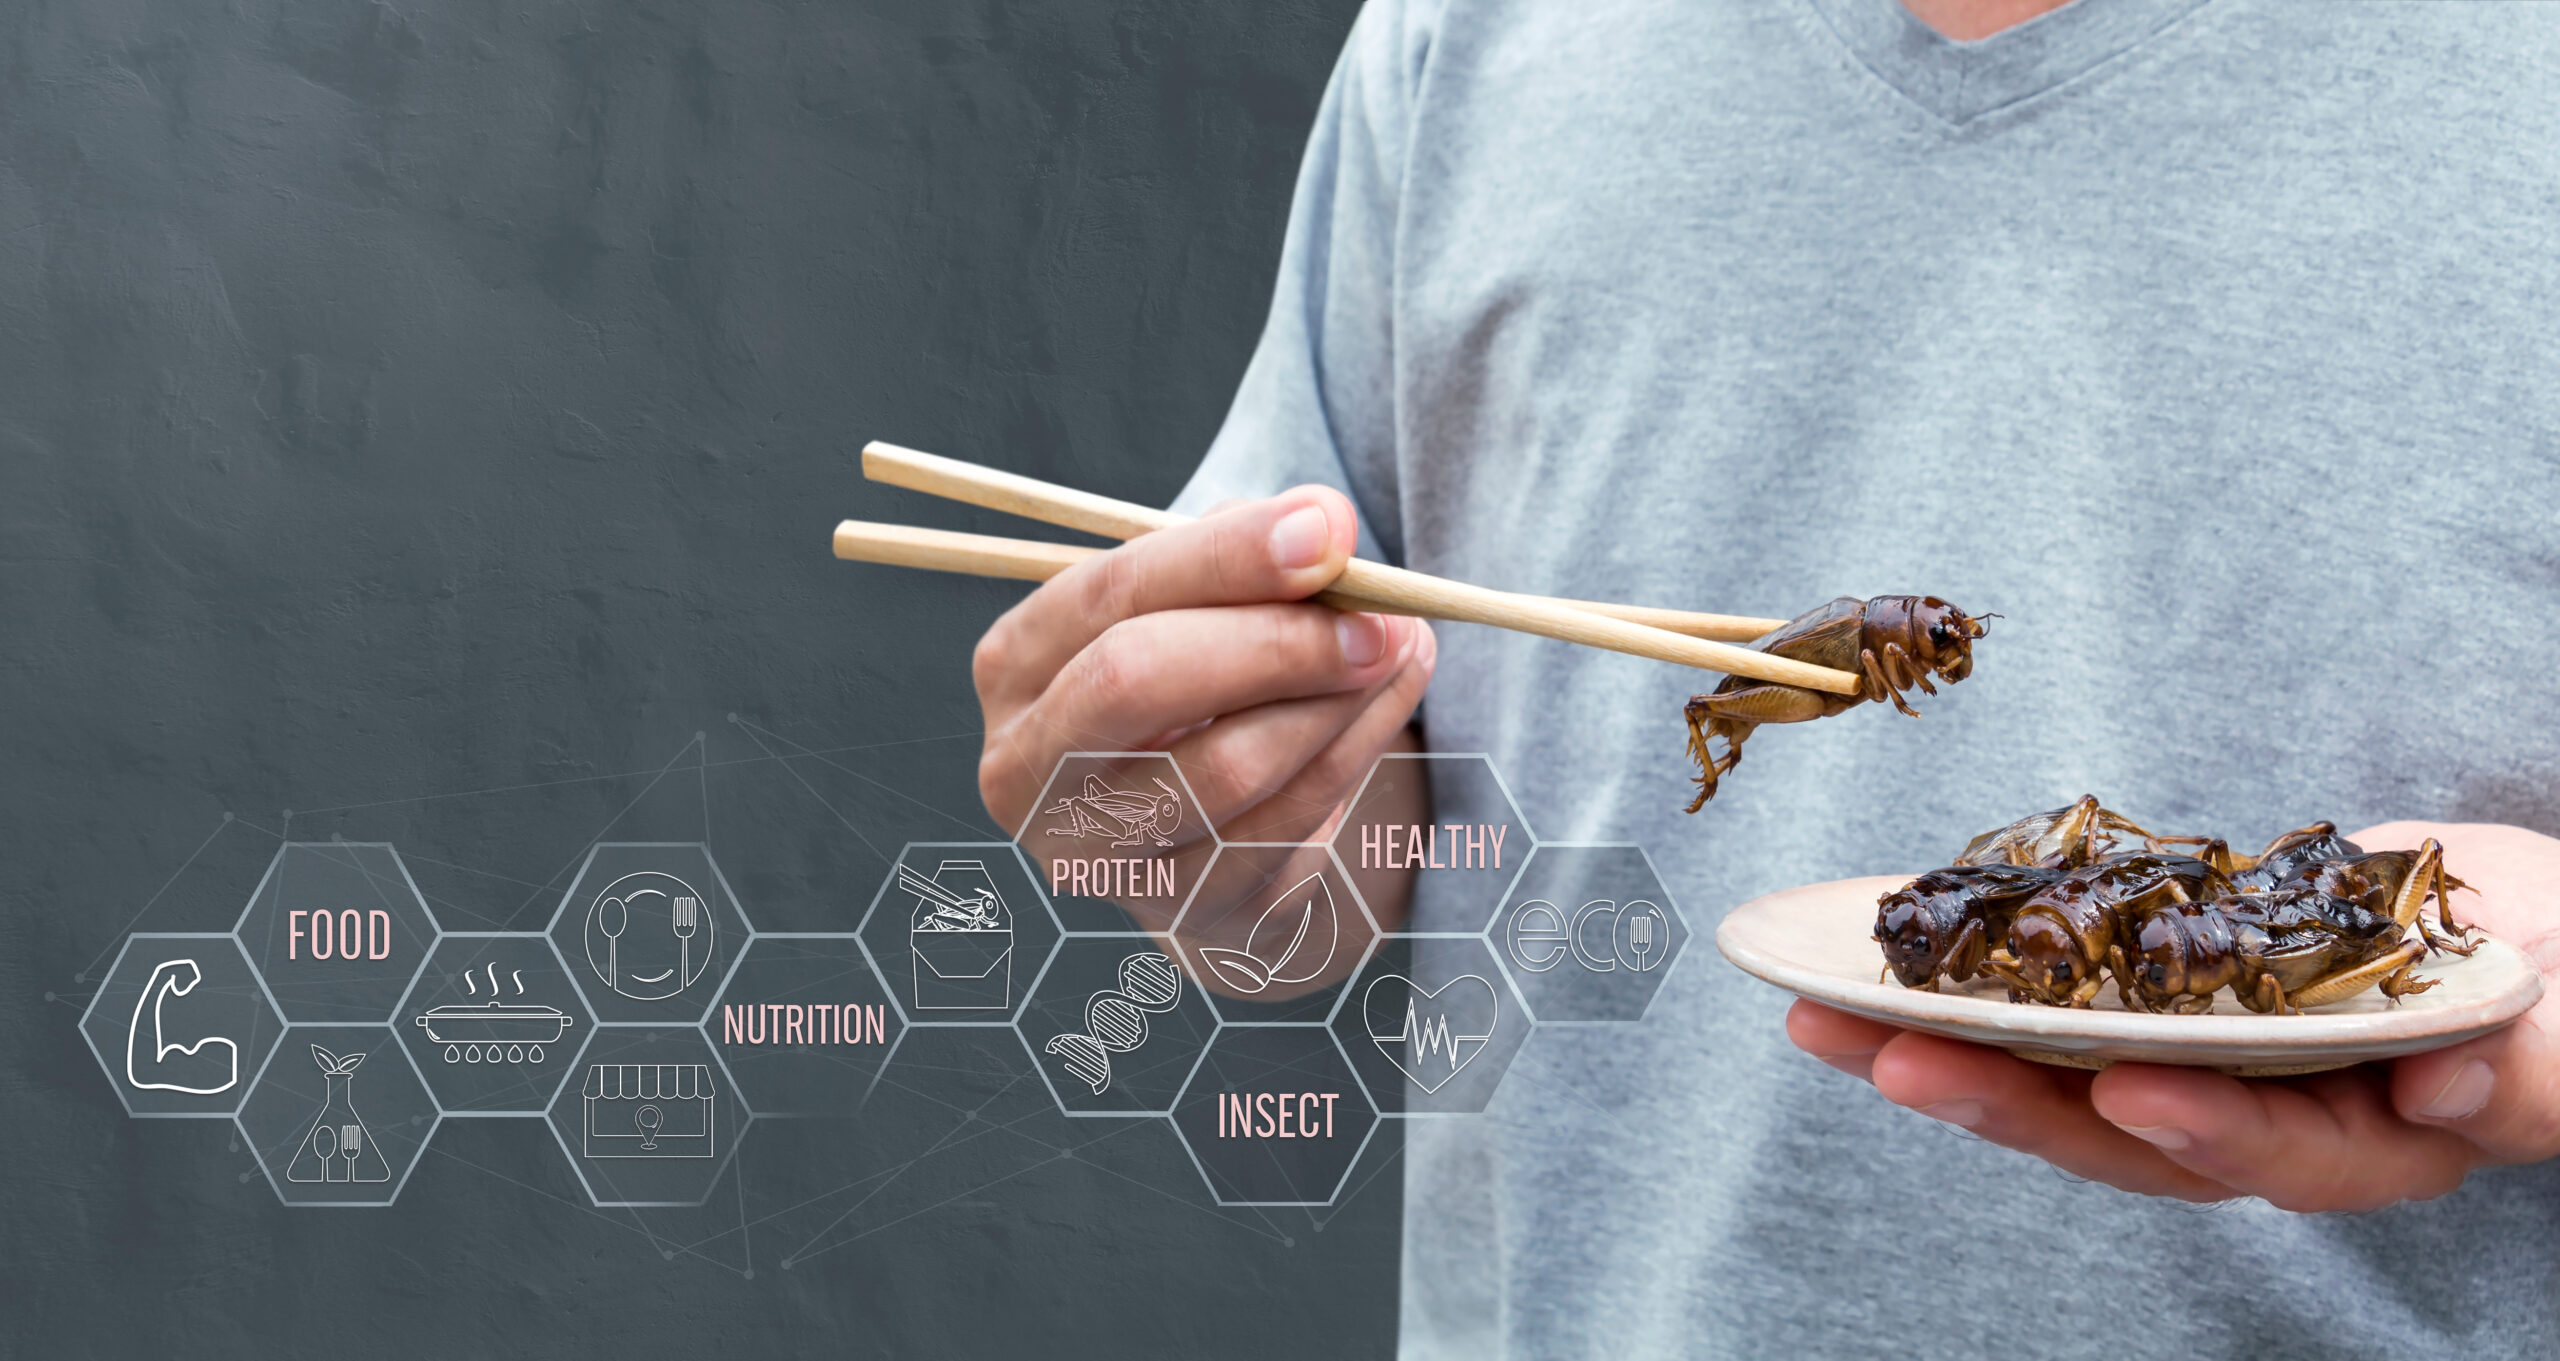 Man hand holding chopsticks eating Cricket insect deep-fried as food on restaurant and symbol icons media nutrition, it is good source of protein edible for future.